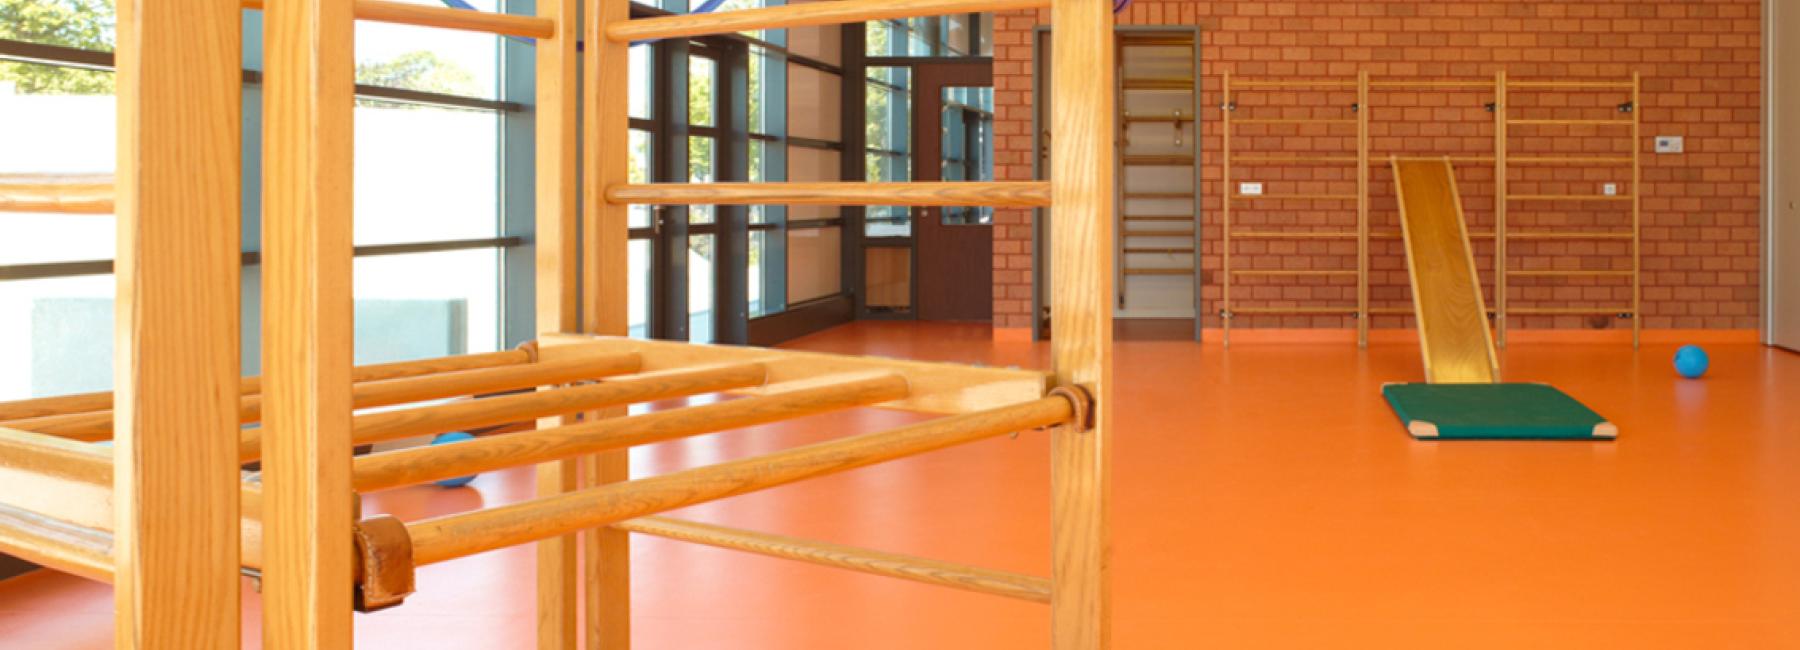 OBS 'T WAD - GERFLOR BENELUX